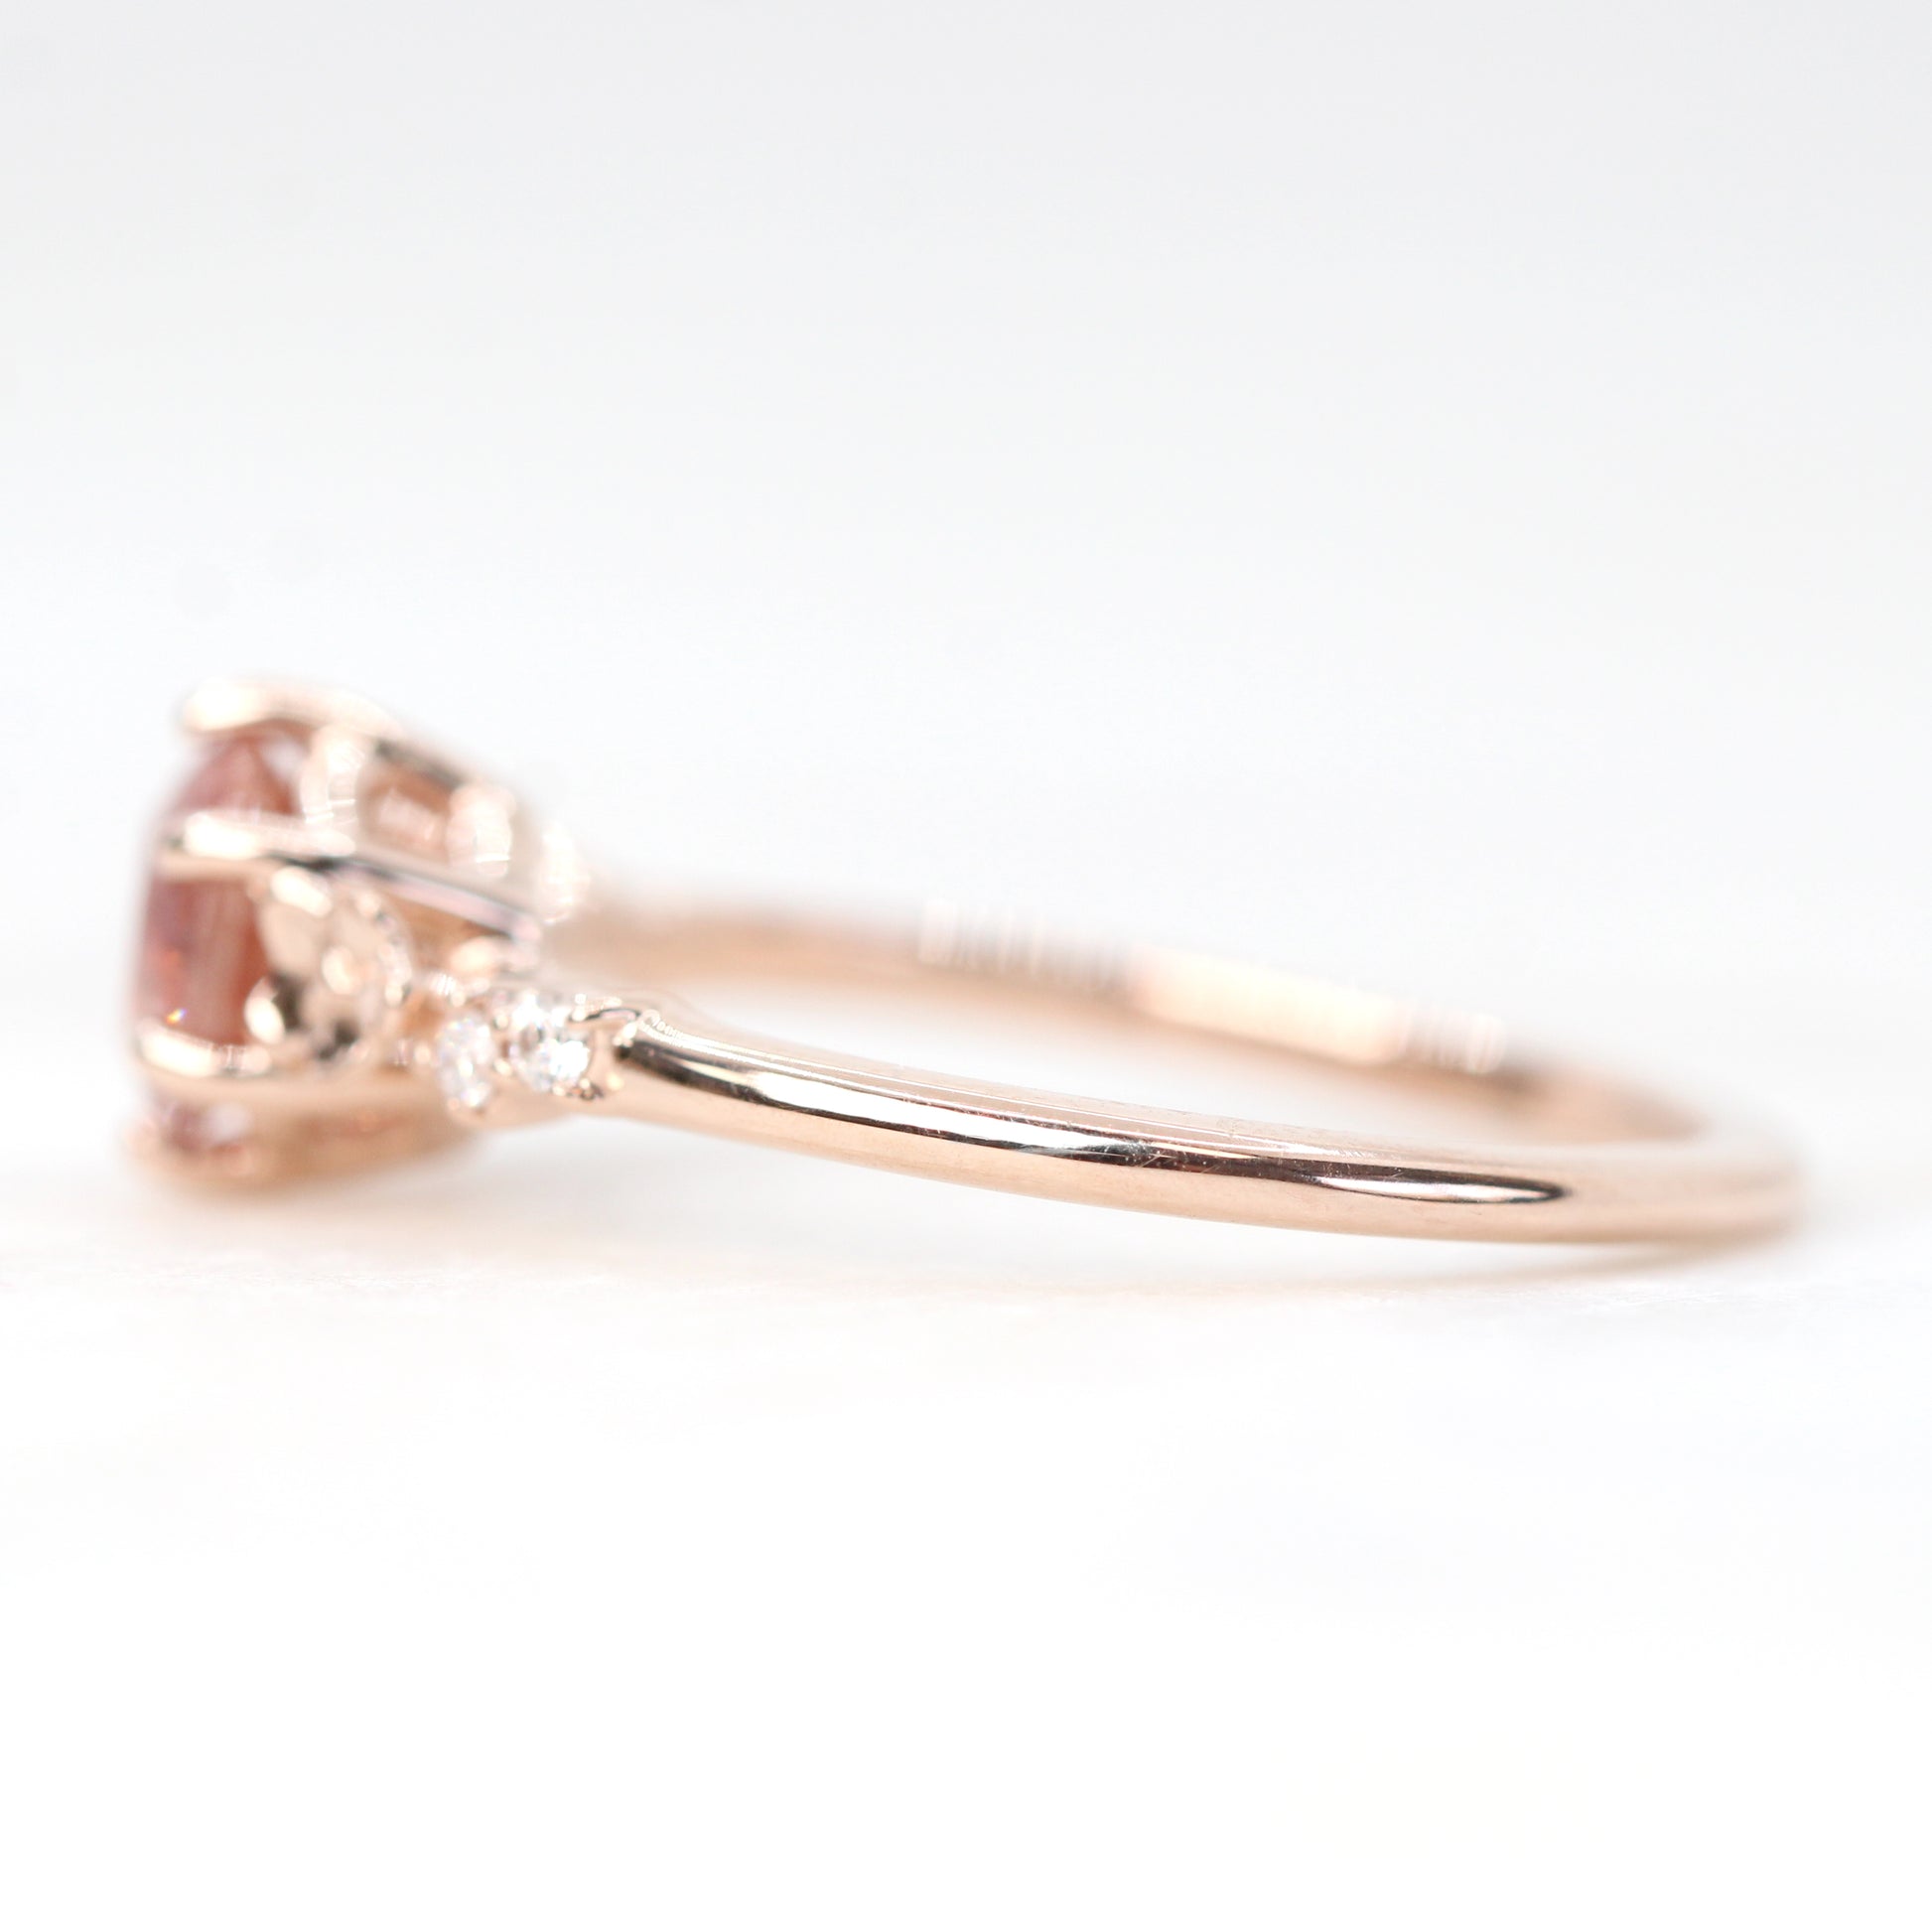 Meadow Ring with a 0.70 Carat Round Sunstone and White Accent Diamonds in 14k Rose Gold - Ready to Size and Ship - Midwinter Co. Alternative Bridal Rings and Modern Fine Jewelry